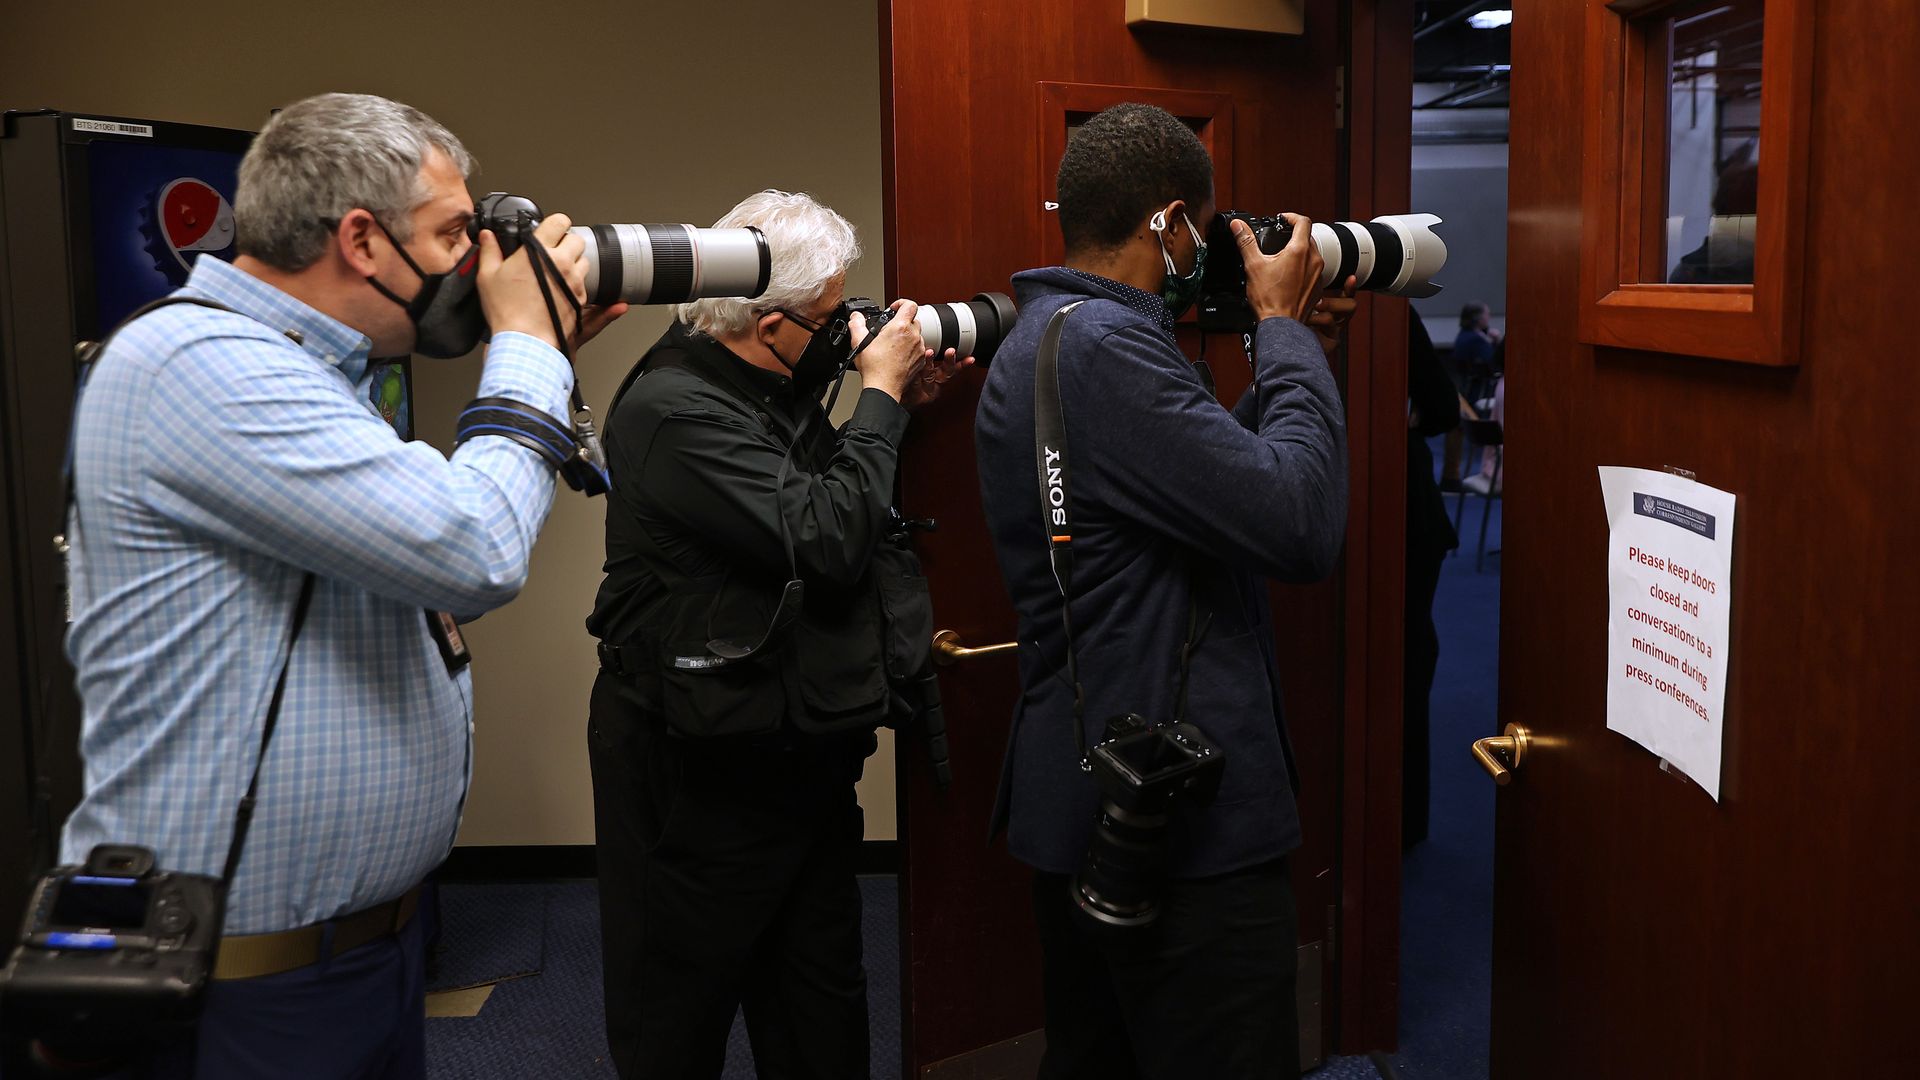 Photographers are seen taking pictures through a door during a news conference at the Capitol about D.C. statehood.